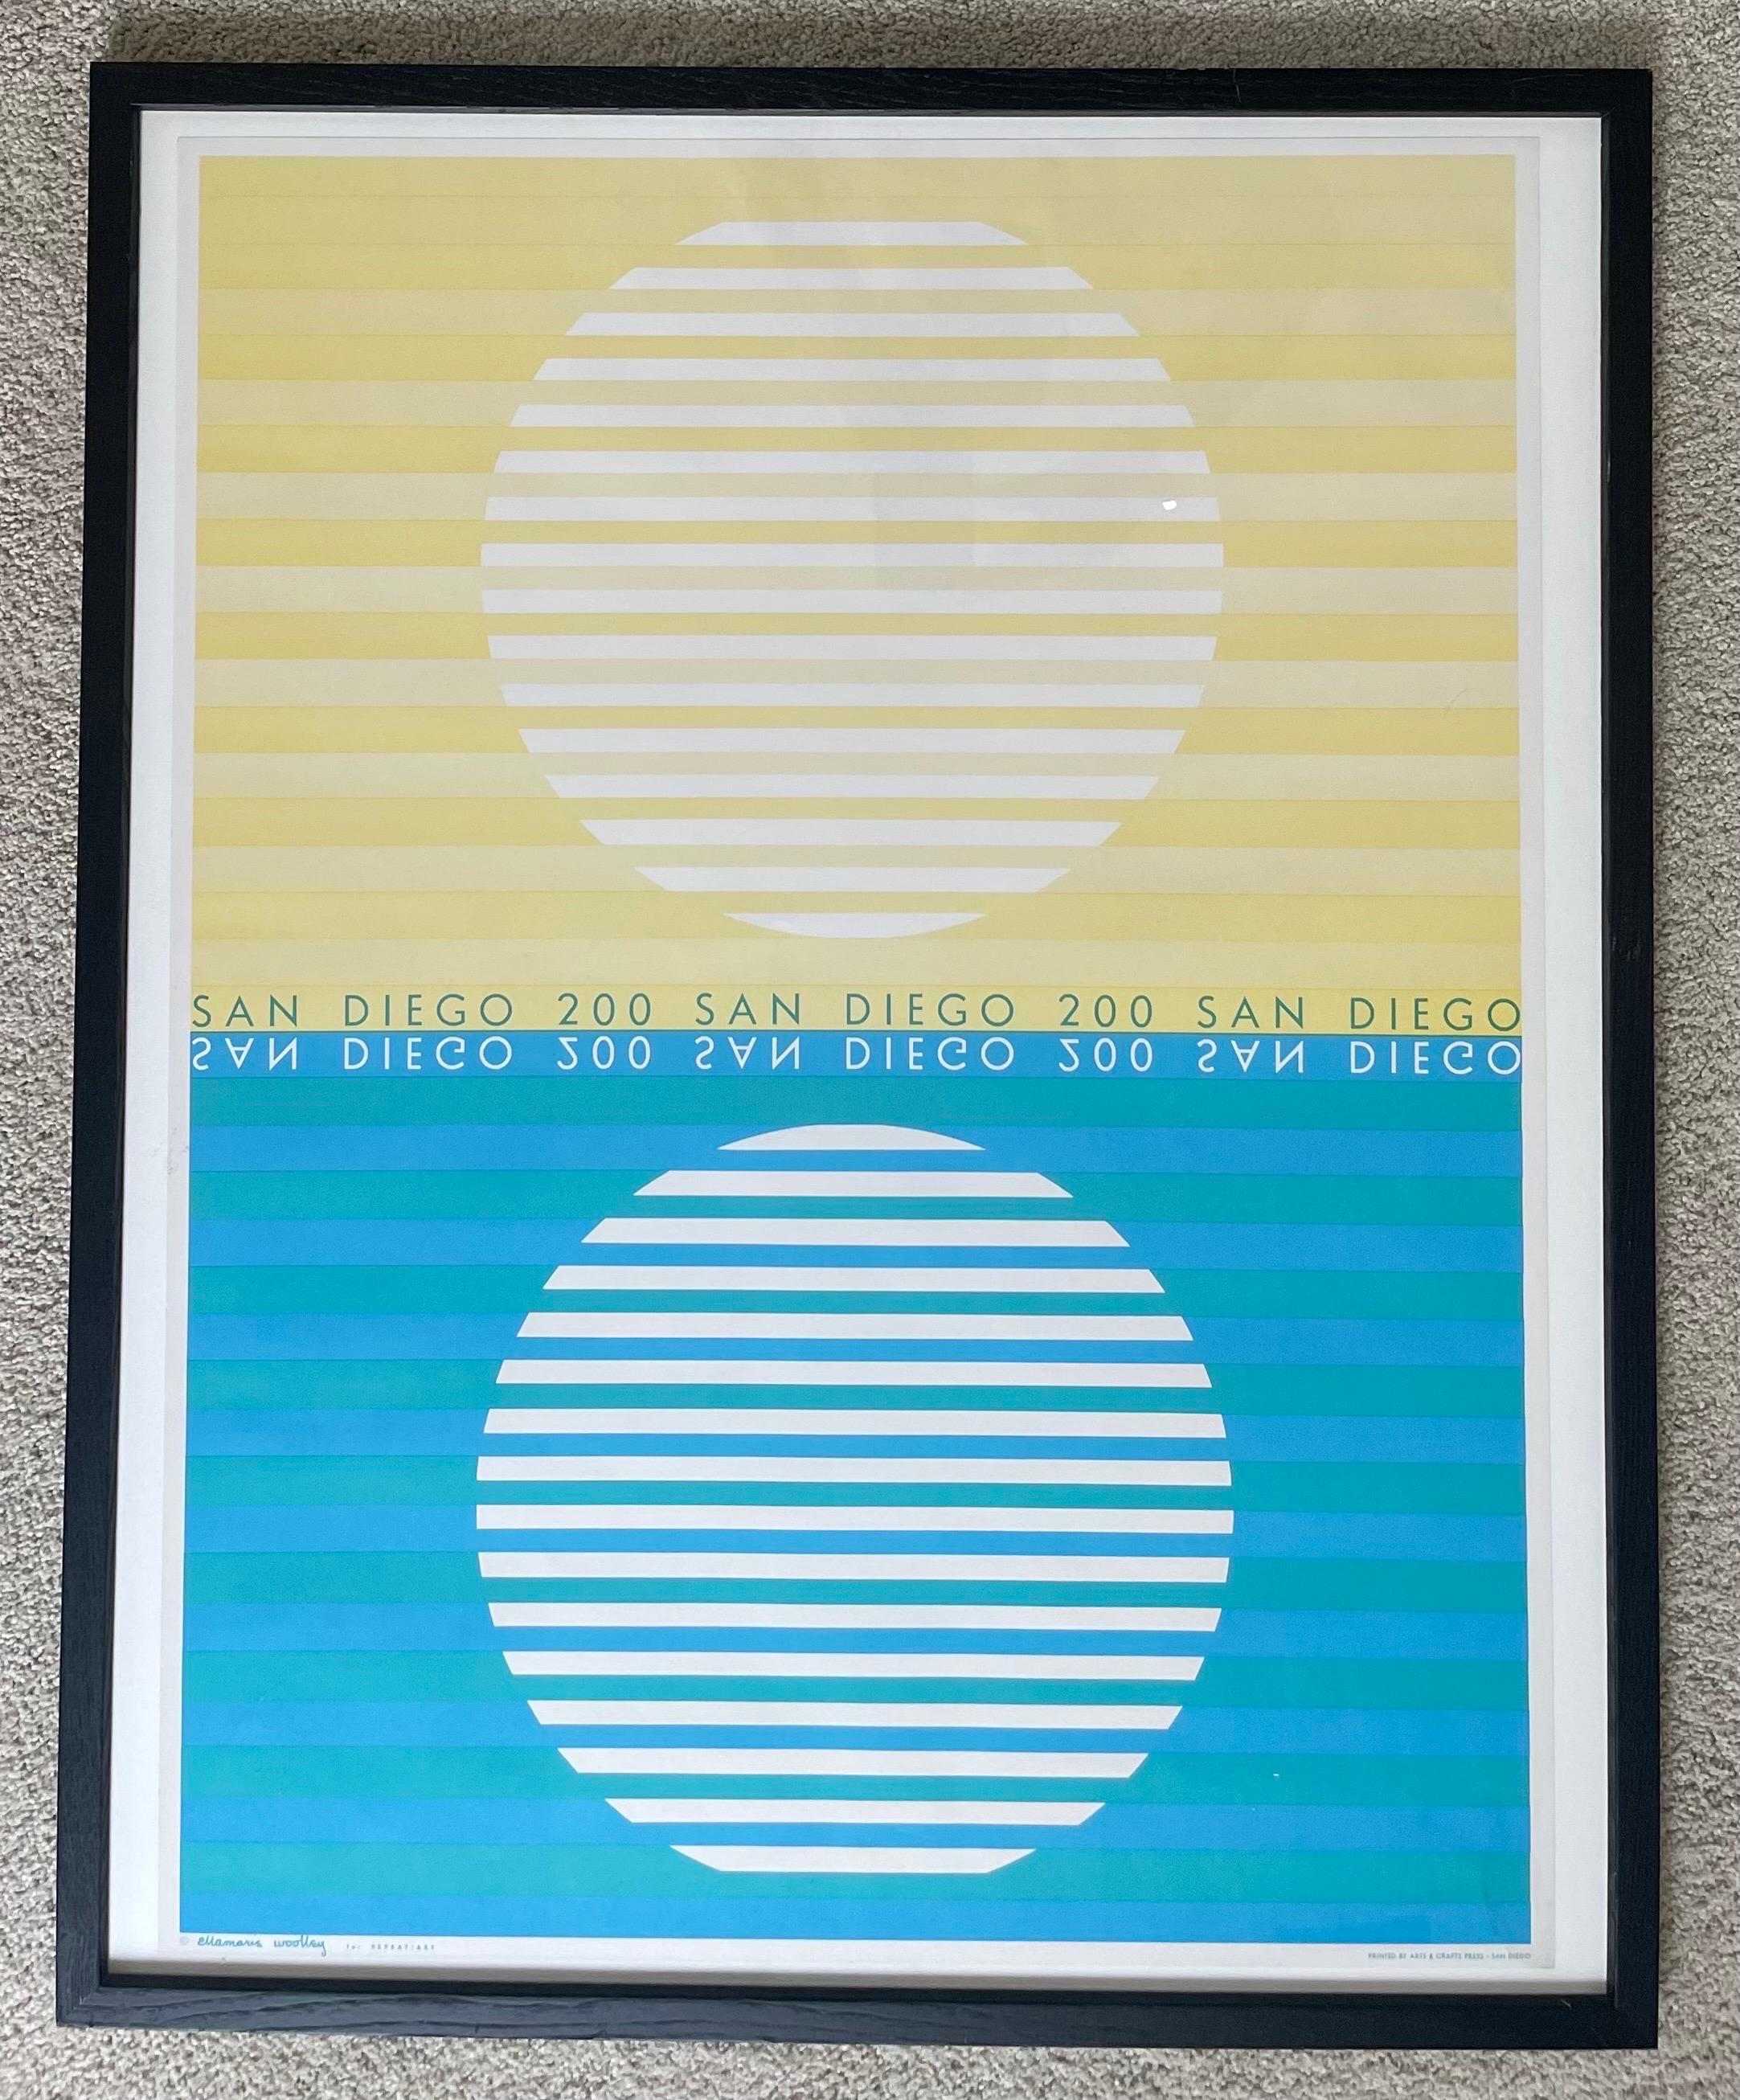 A super rare and hard to find Ellamarie Woolley San Diego 200 arts & crafts poster, circa 2000. The piece is in good condition with a very small water stain on the bottom right of the piece (please see pictures). The poster is presented in a thin